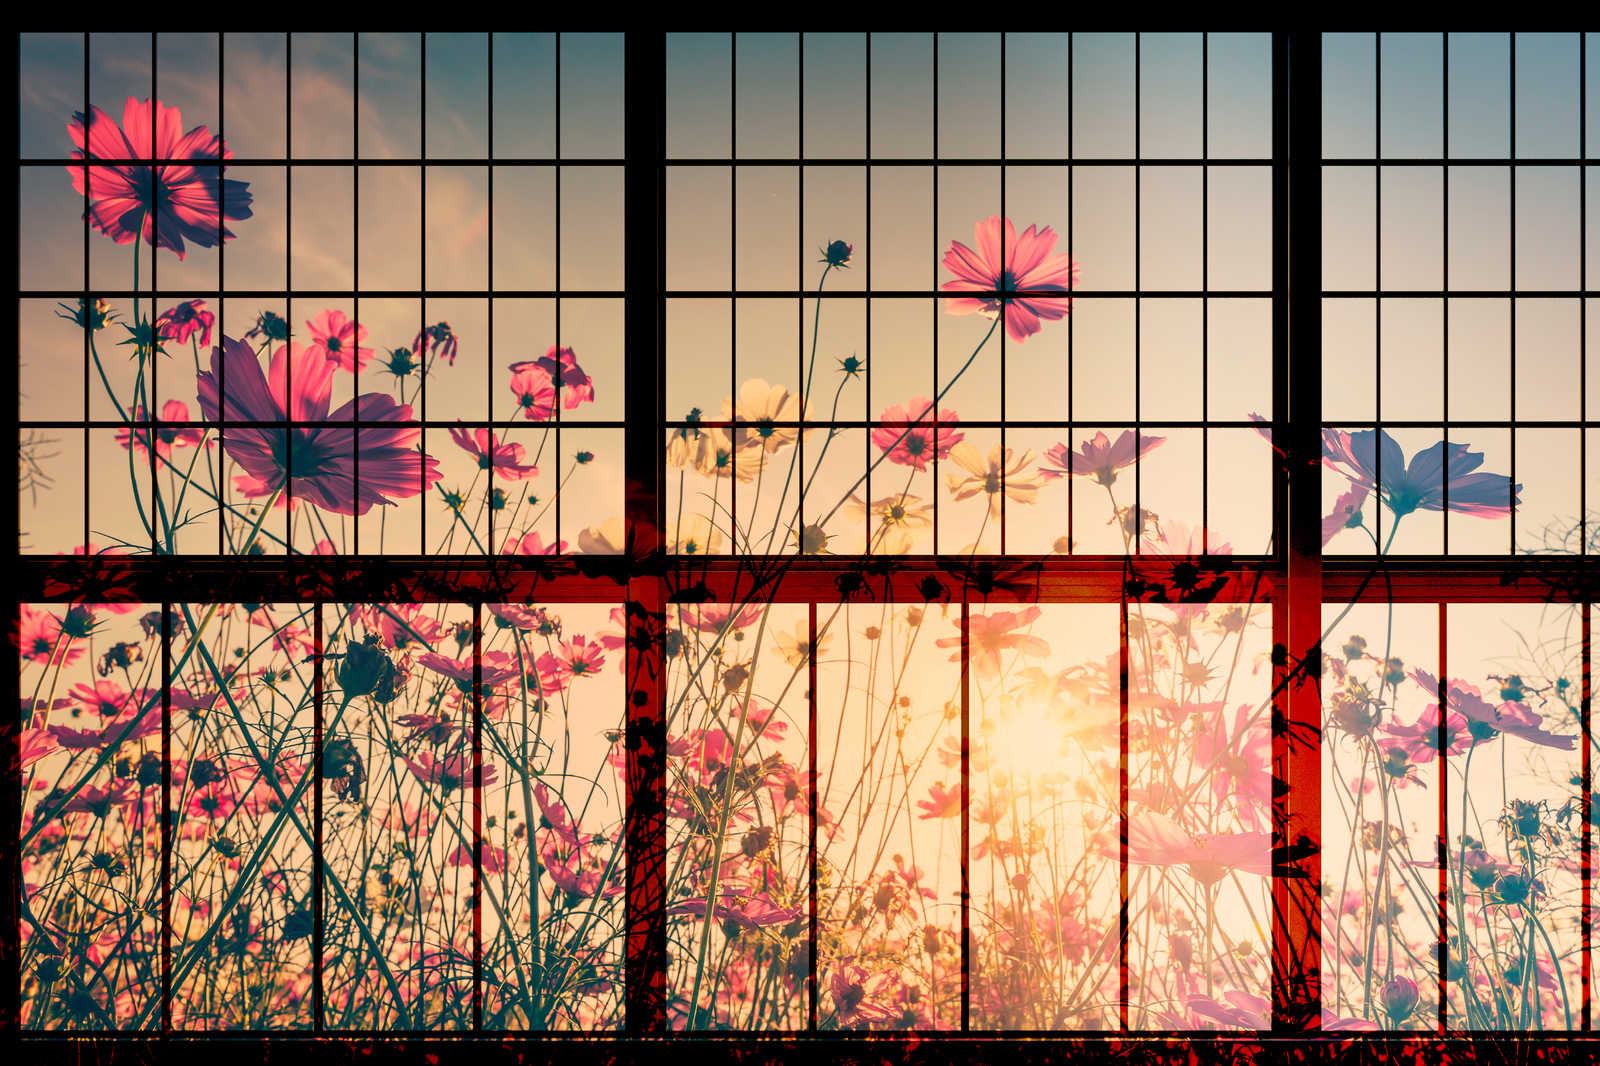             Meadow 1 - Muntin Window Canvas Painting with Flower Meadow - 0.90 m x 0.60 m
        